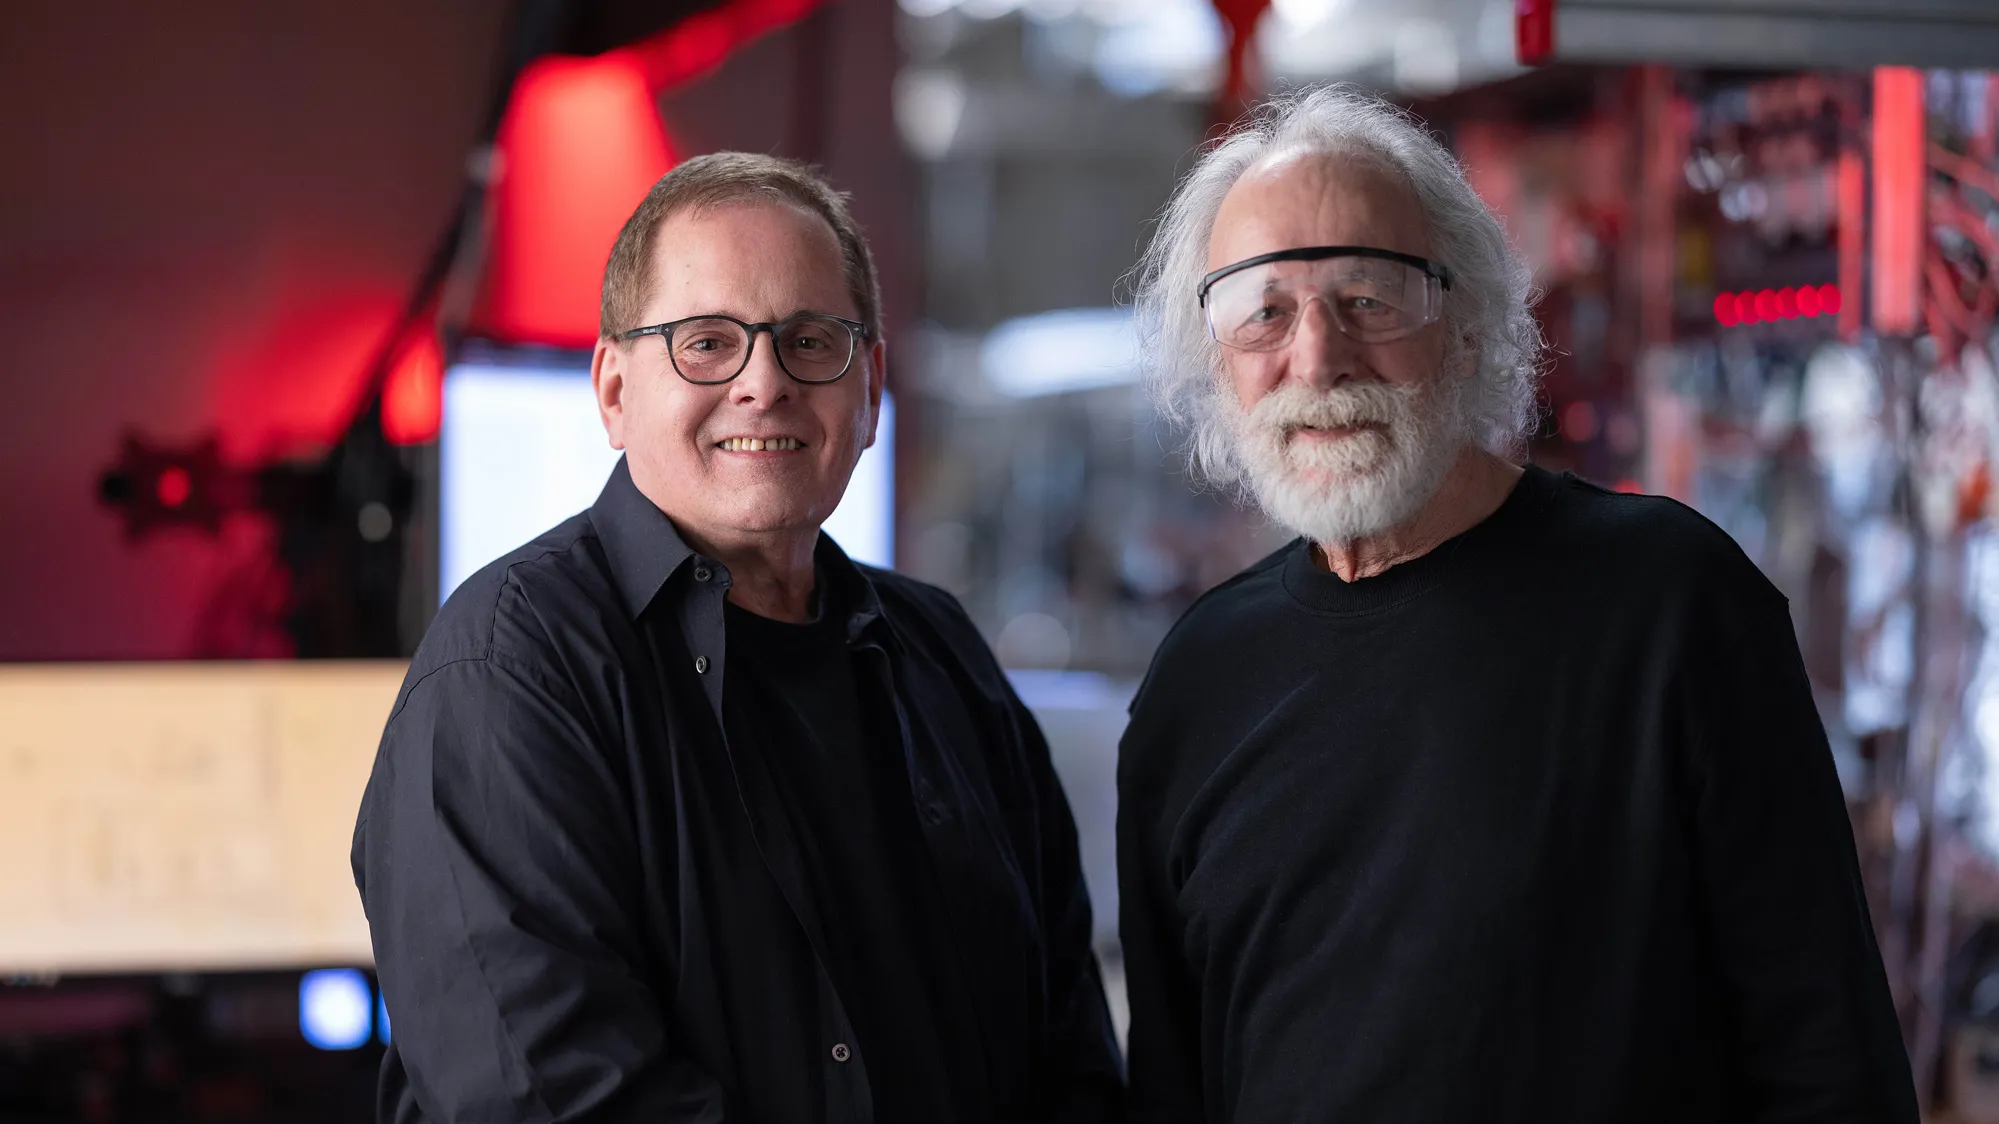 Lou DiMauro and Pierre Agostini smile as they pose for a portrait. Pierre has flowing white hair and a beard and wears safety goggles. Lou has short brown hair and glasses. Both are white men who radiate friendliness while dressed casually. 